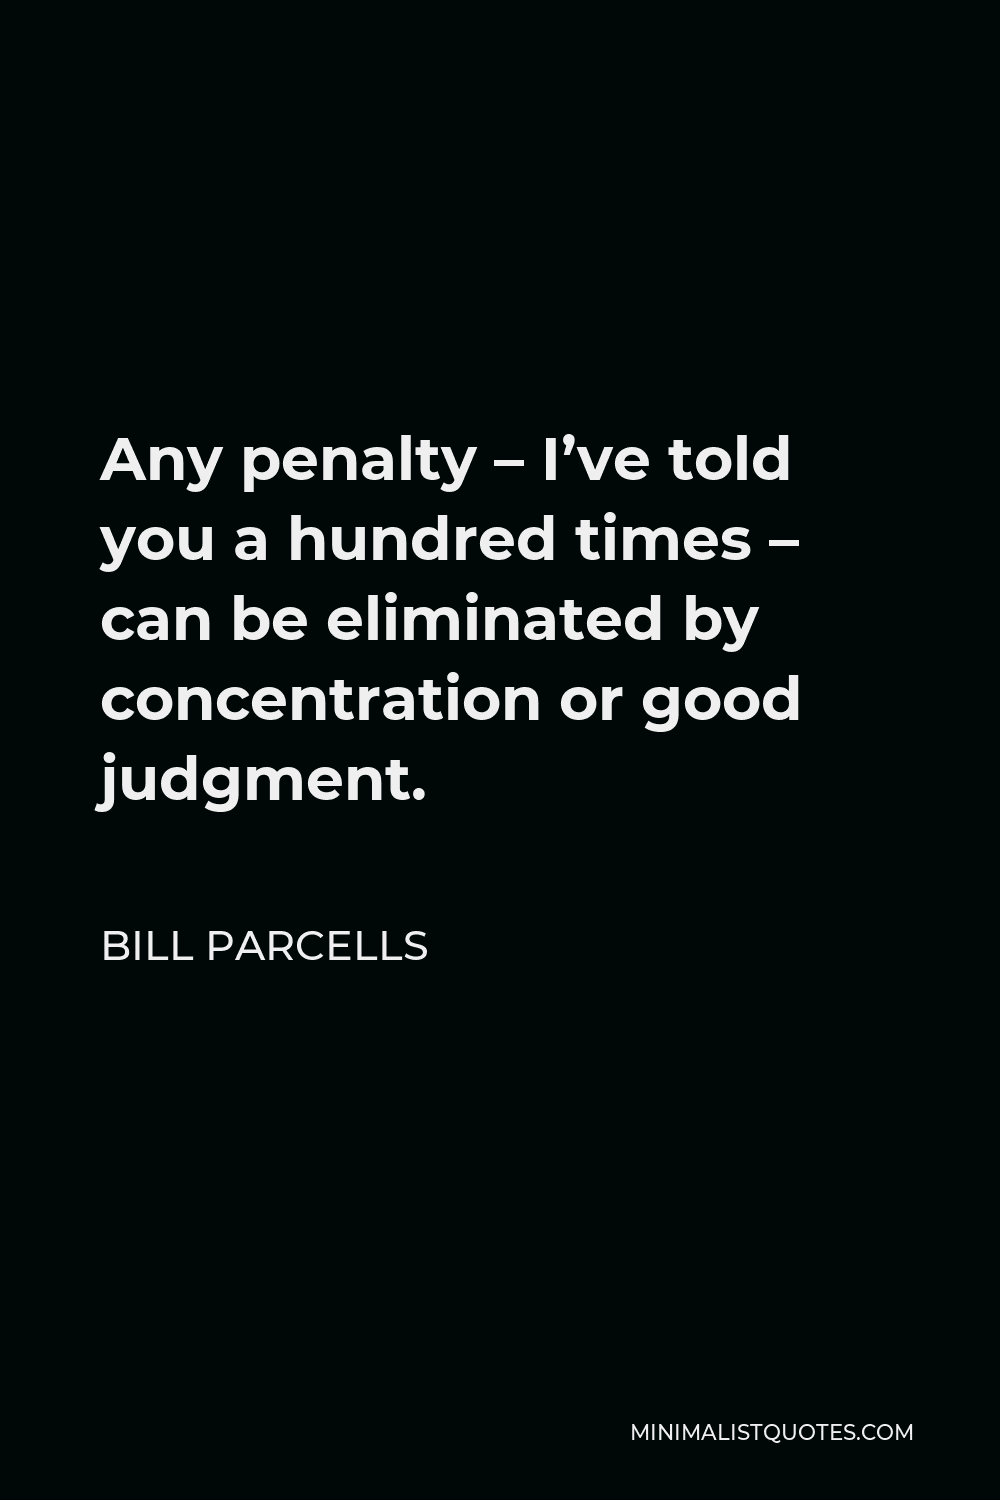 Bill Parcells Quote - Any penalty – I’ve told you a hundred times – can be eliminated by concentration or good judgment.